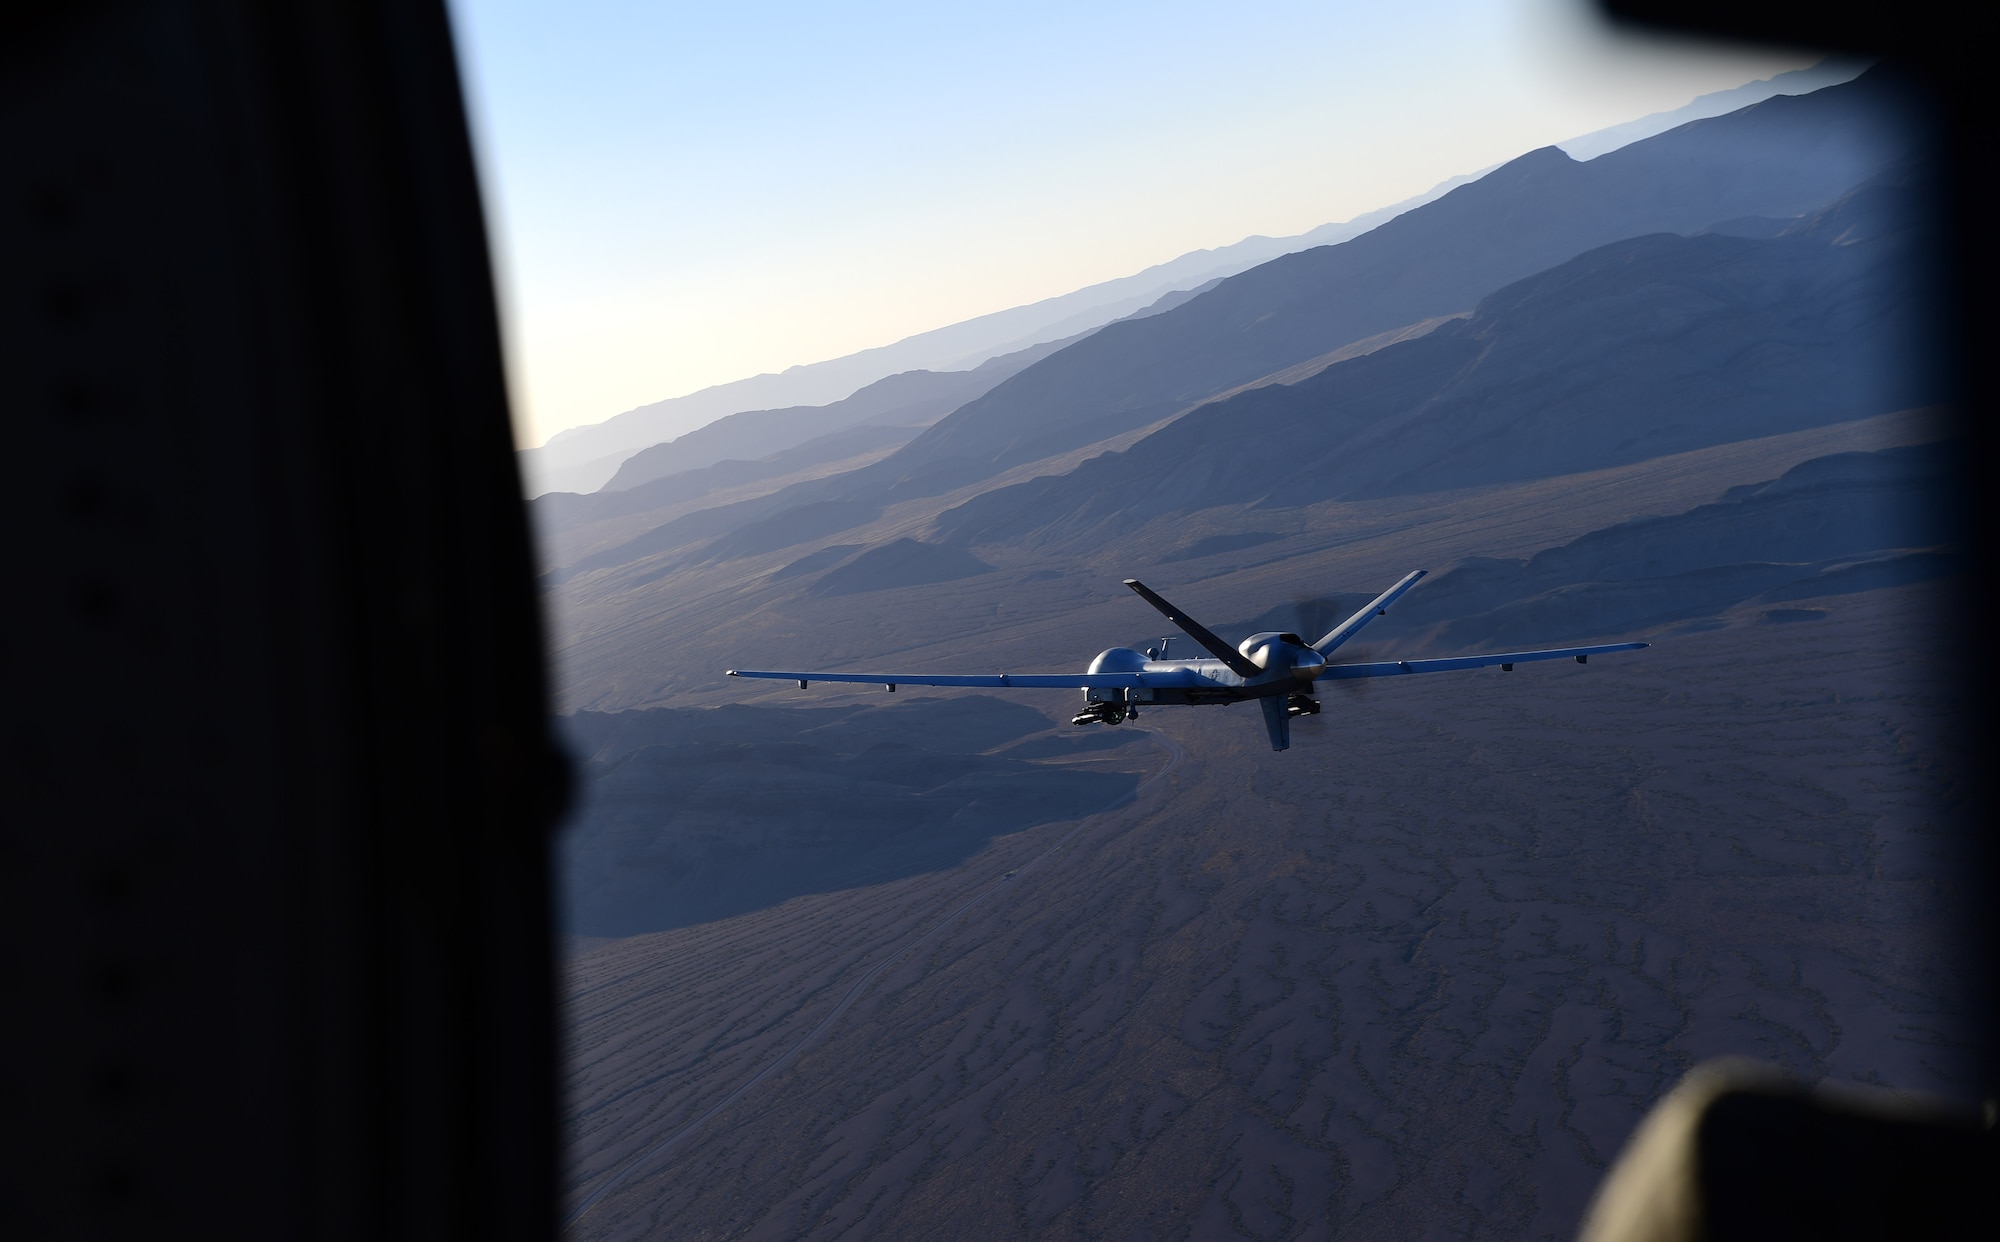 An MQ-9 Reaper, piloted from the ground by Maj. Stevo, MQ-9 instructor pilot, flies over the Nevada Test and Training Range, July 15, 2019. Airmen stationed at Creech Air Force Base support local training missions and long-range combat missions in various areas of responsibility 24/7/365. (U.S. Air Force photo by Senior Airman Haley Stevens)